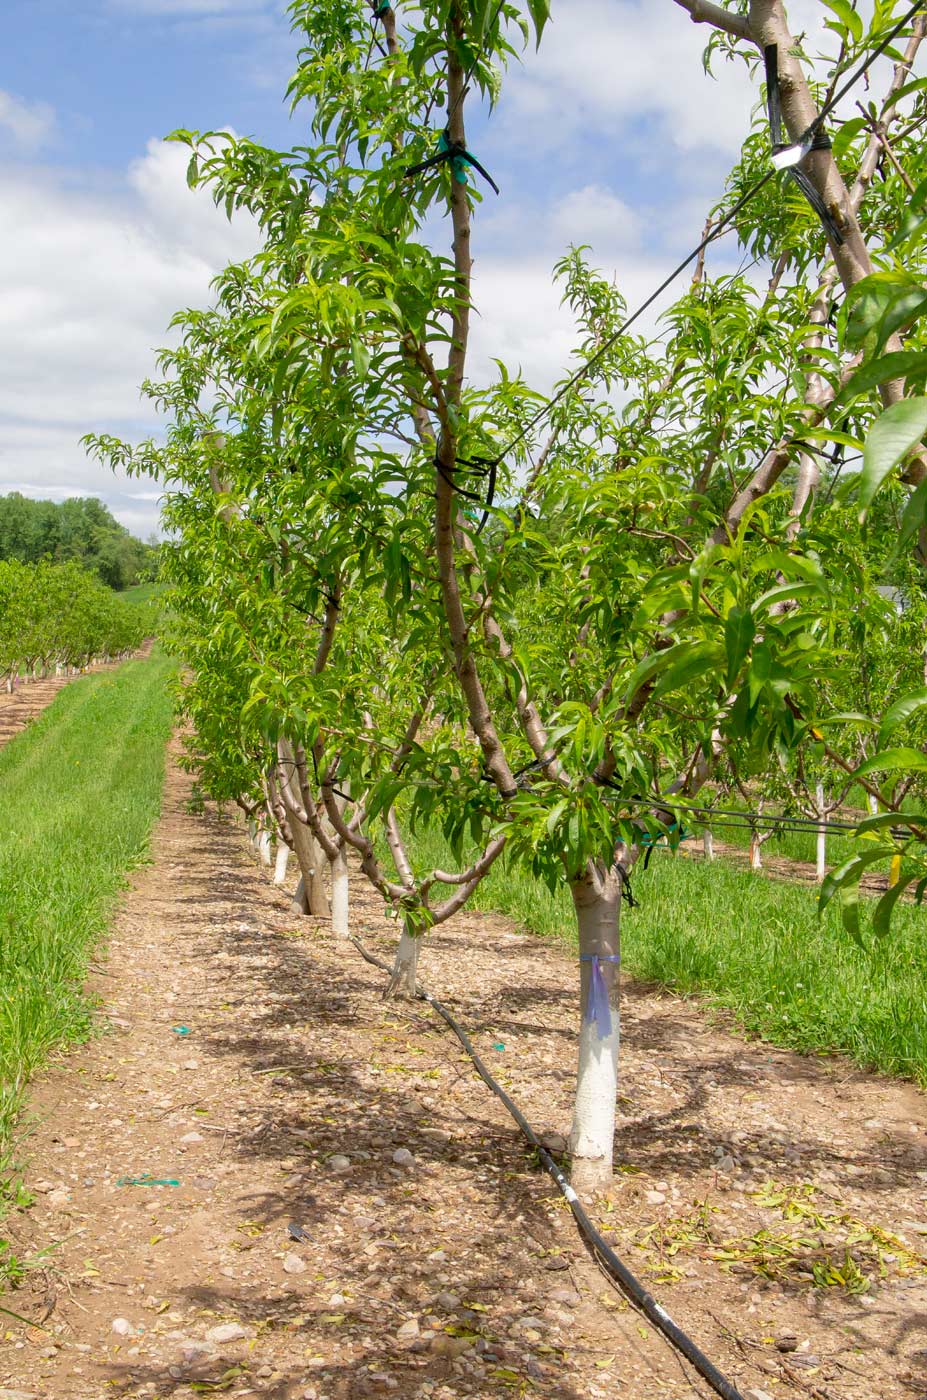 The trellised quad-V peach system trial at the Penn State Fruit Research and Extension Center in Biglerville, PA aims to increase yields and lower production costs. (Kate Prengaman/Good Fruit Grower)